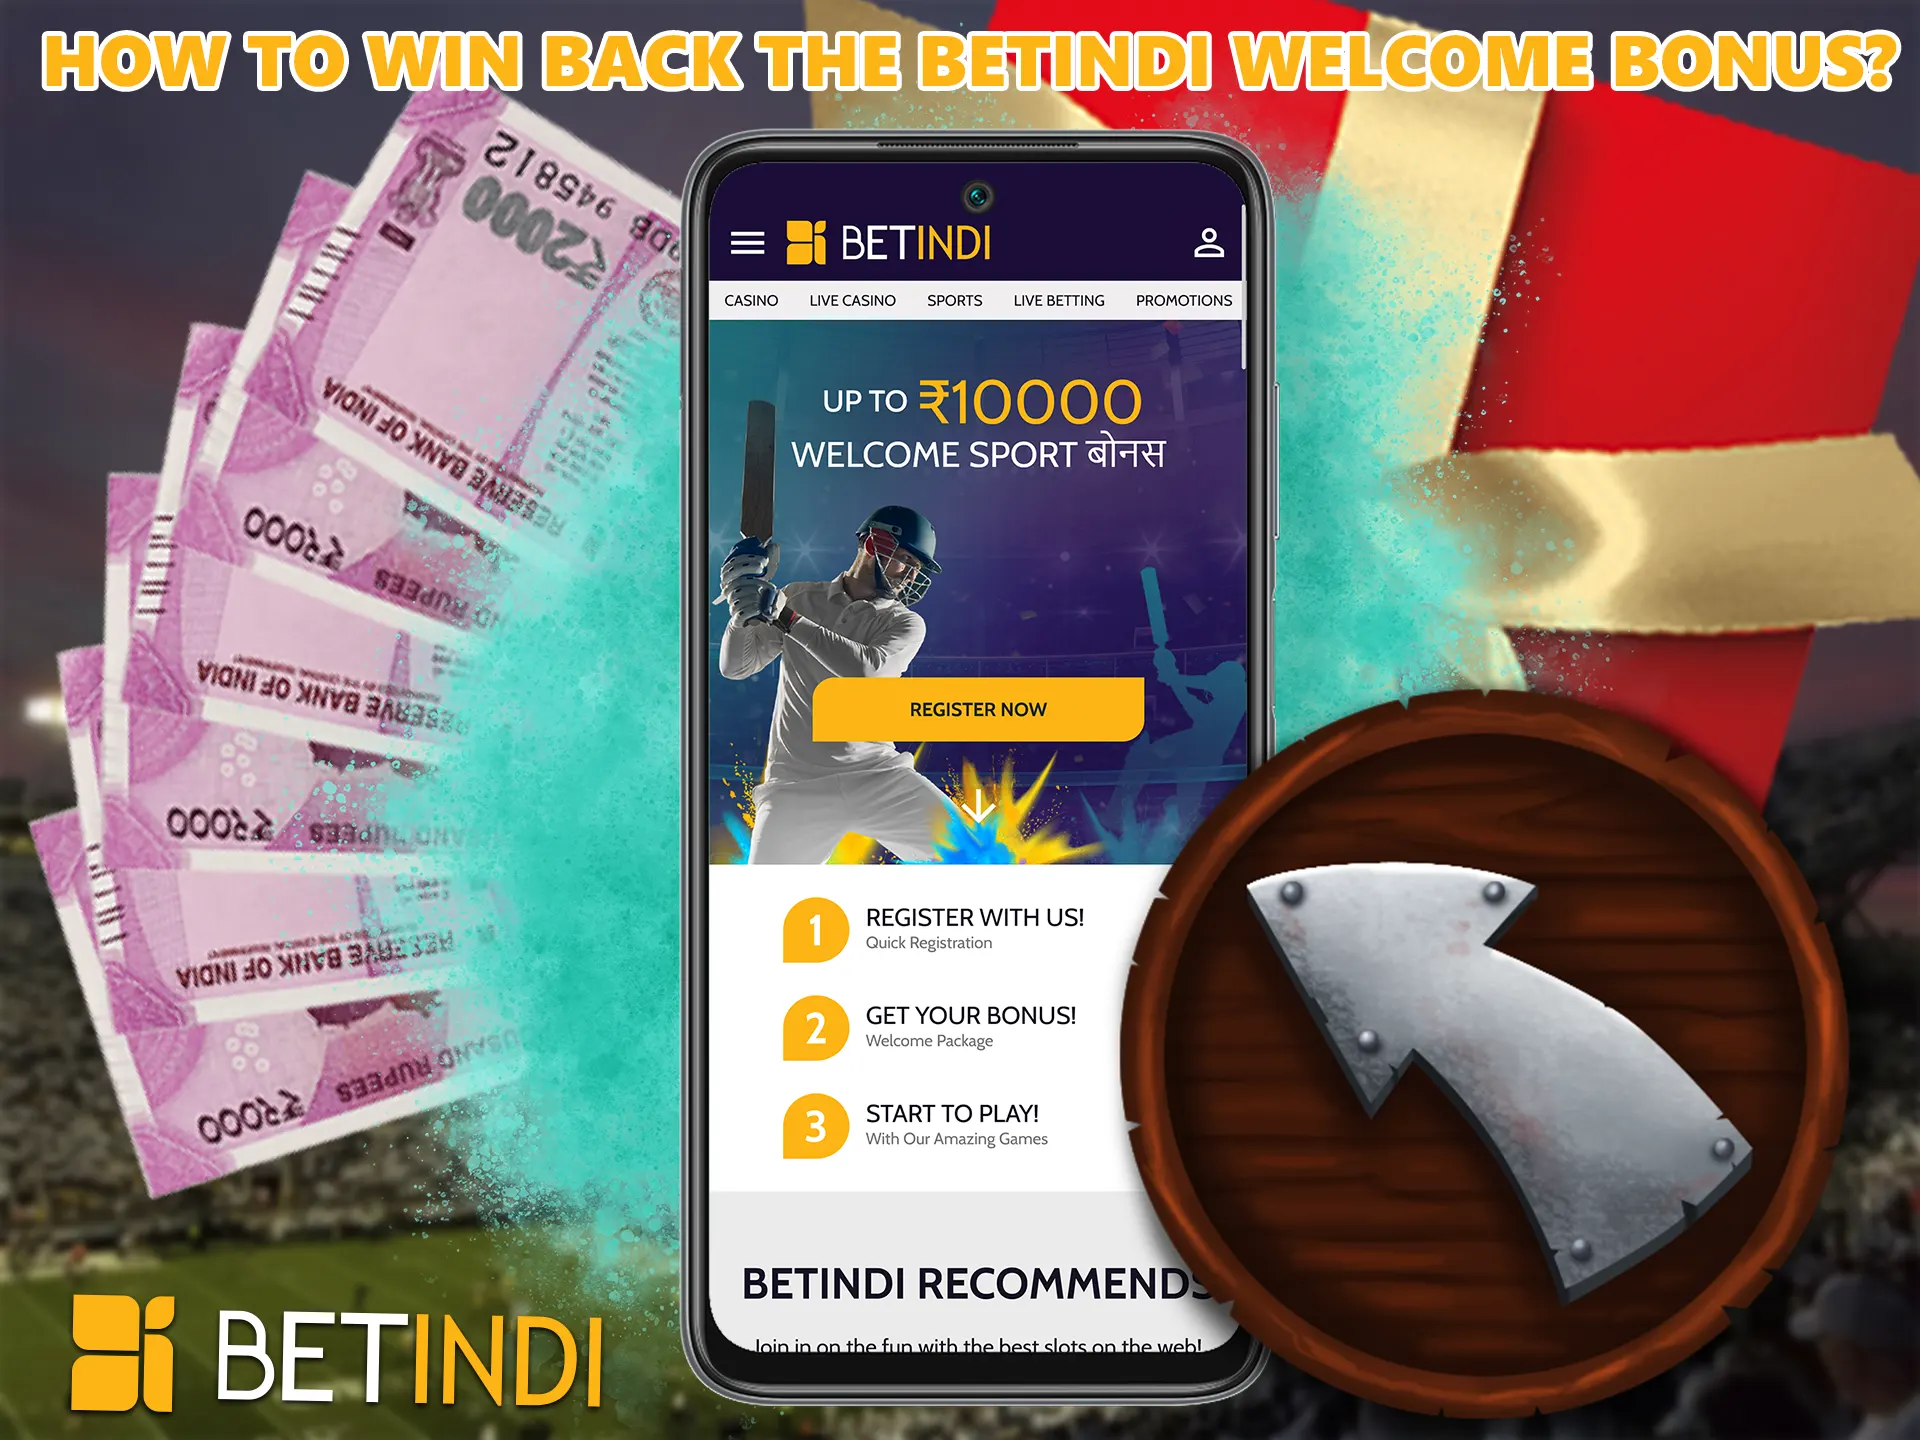 Each BetIndi sports player can wager his bonus, the offer only applies to sat bets.